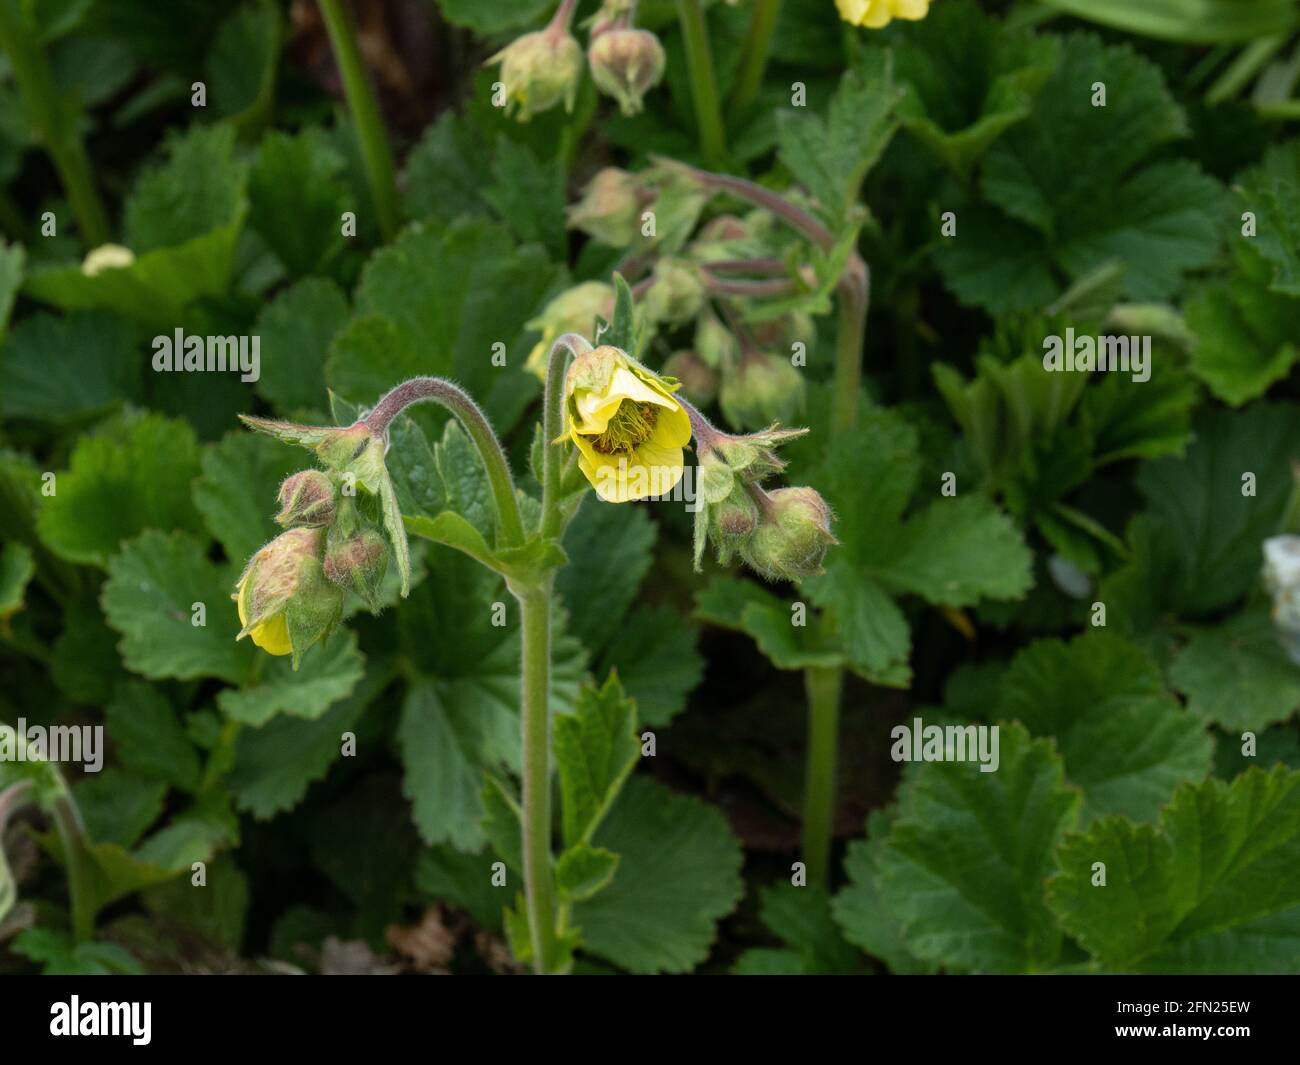 A close up of the hanging yellow bell shaped flowers of Geum x intermedium Stock Photo